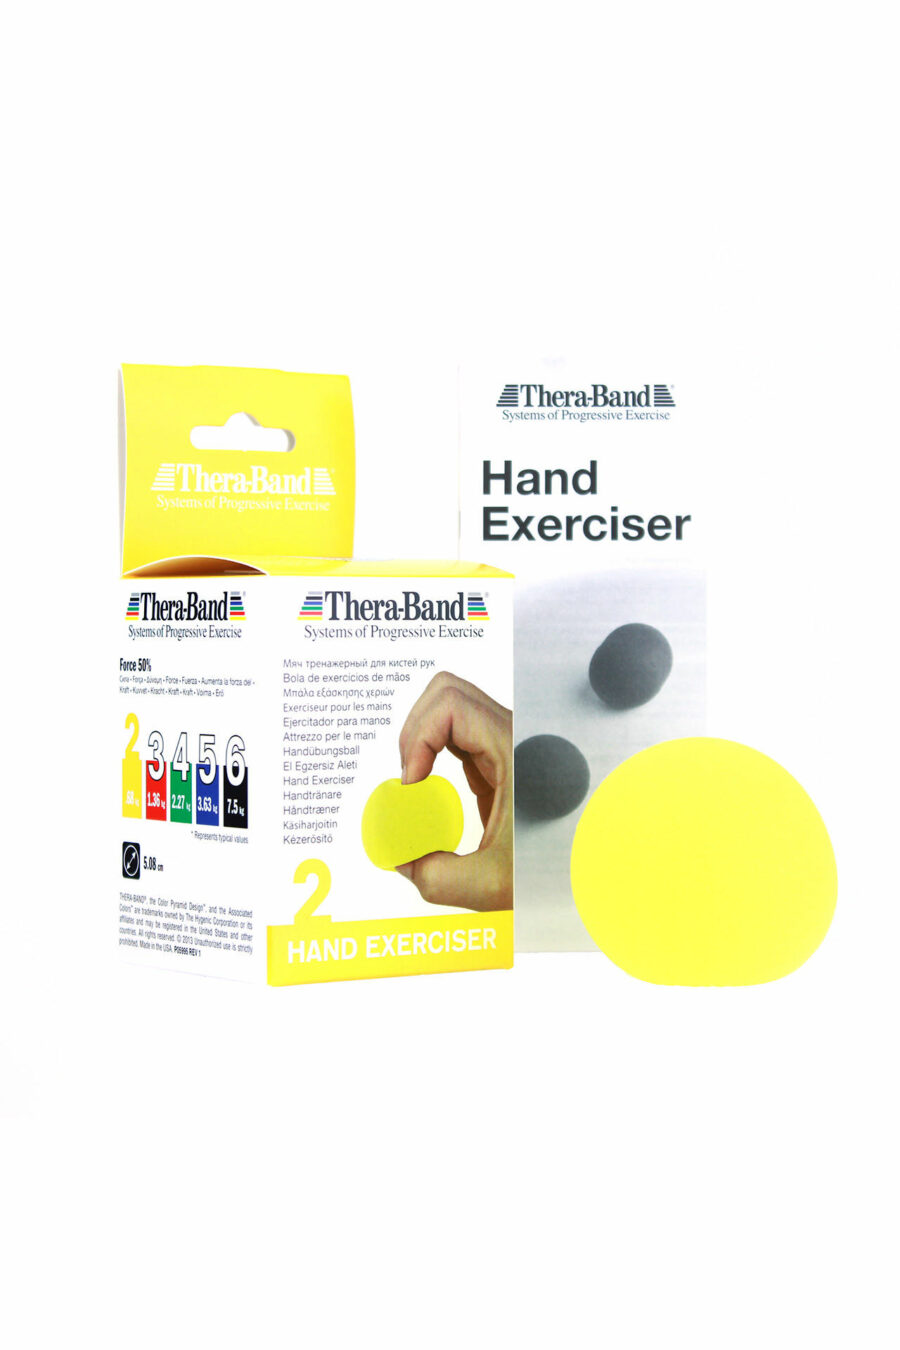 hand excersiser thera band yellow fengbao kung fu finger trainer shop wien 1080